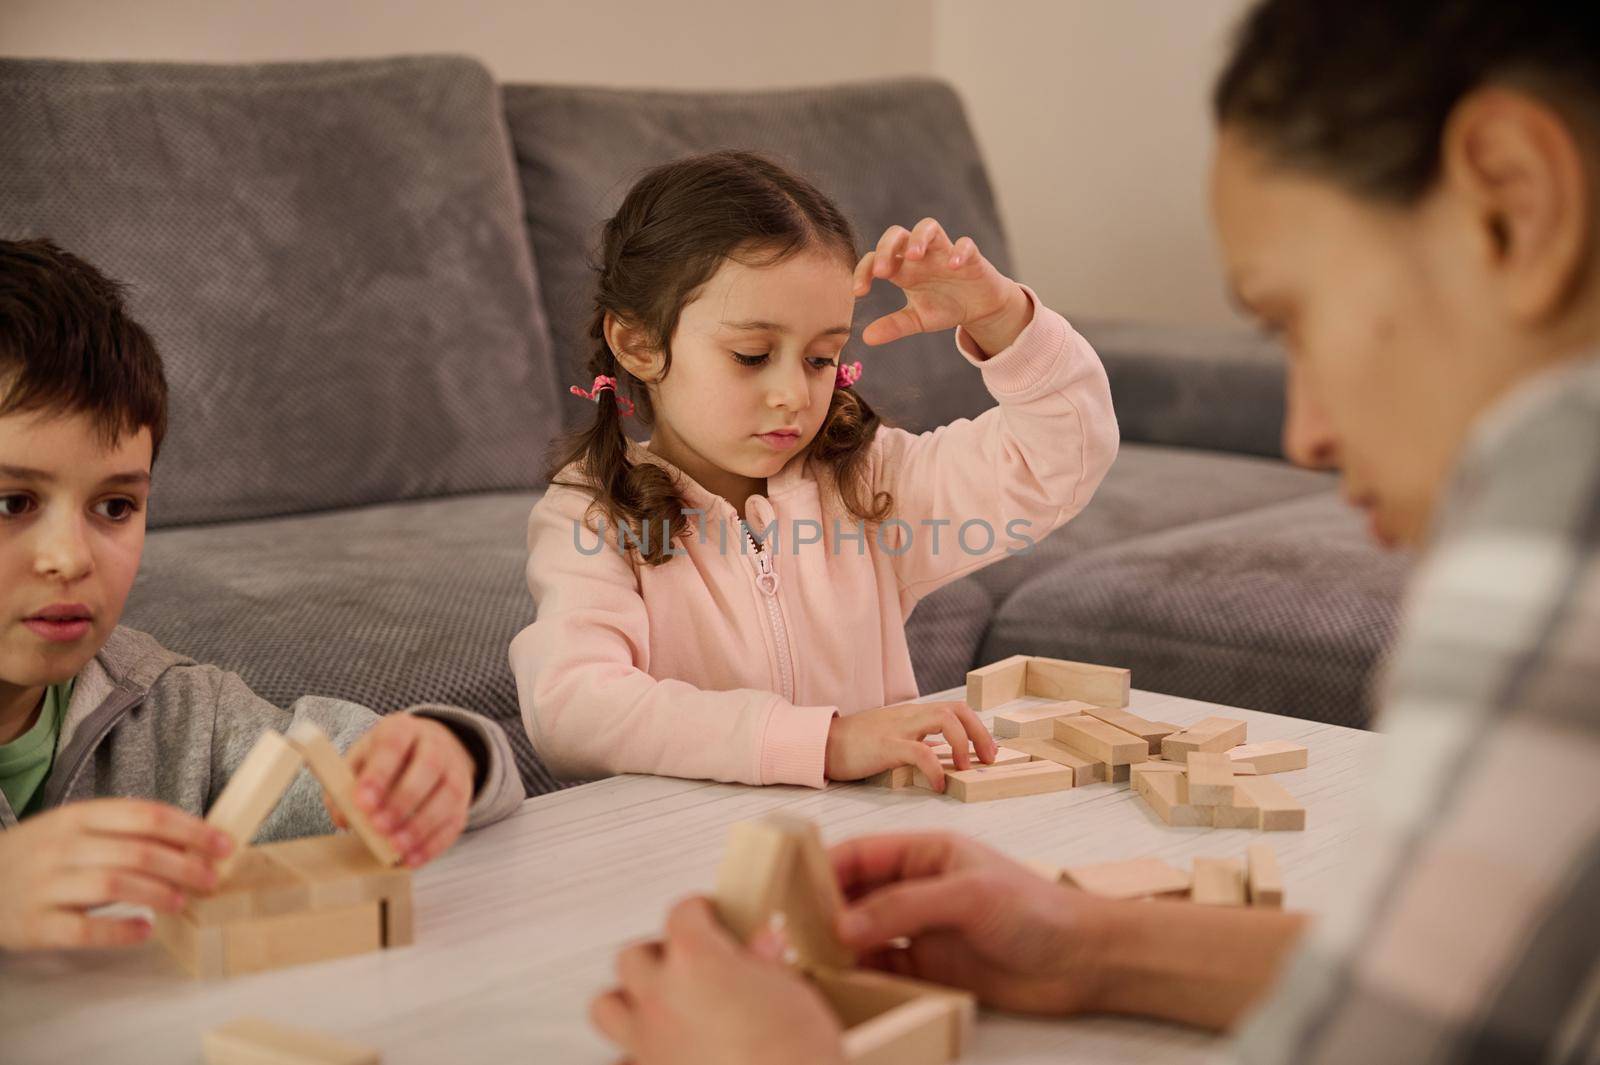 Fine motor skills, concentration development, educational leisure, family pastime concept. Children playing board game with their blurred mother focused on building wooden structure in foreground